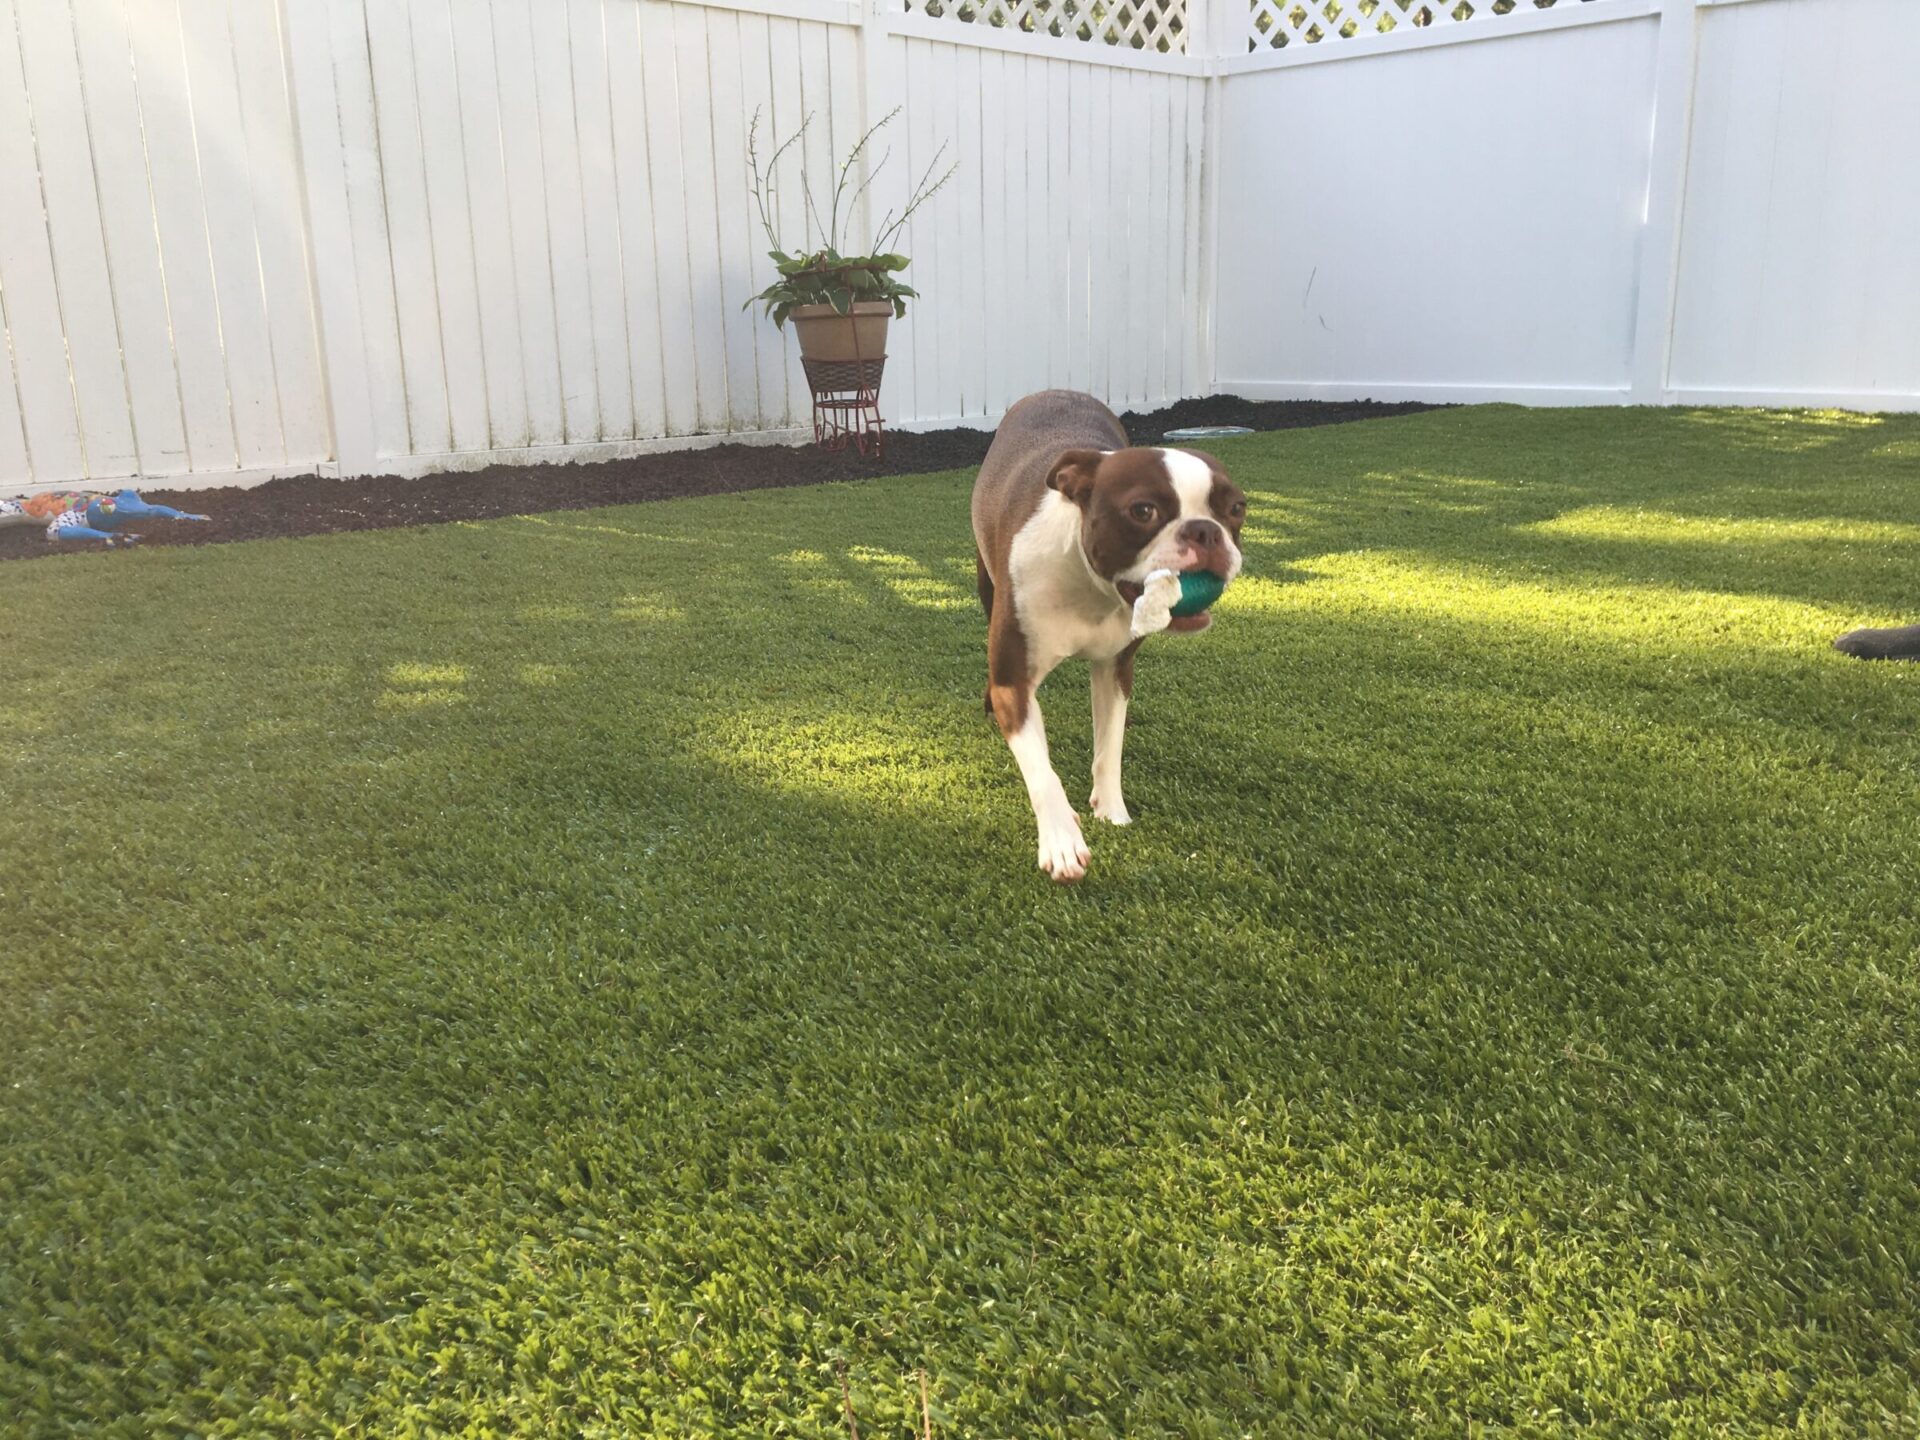 A brown and white dog runs across a green, grassy backyard with a toy in its mouth, white fencing, and a plant in the background.